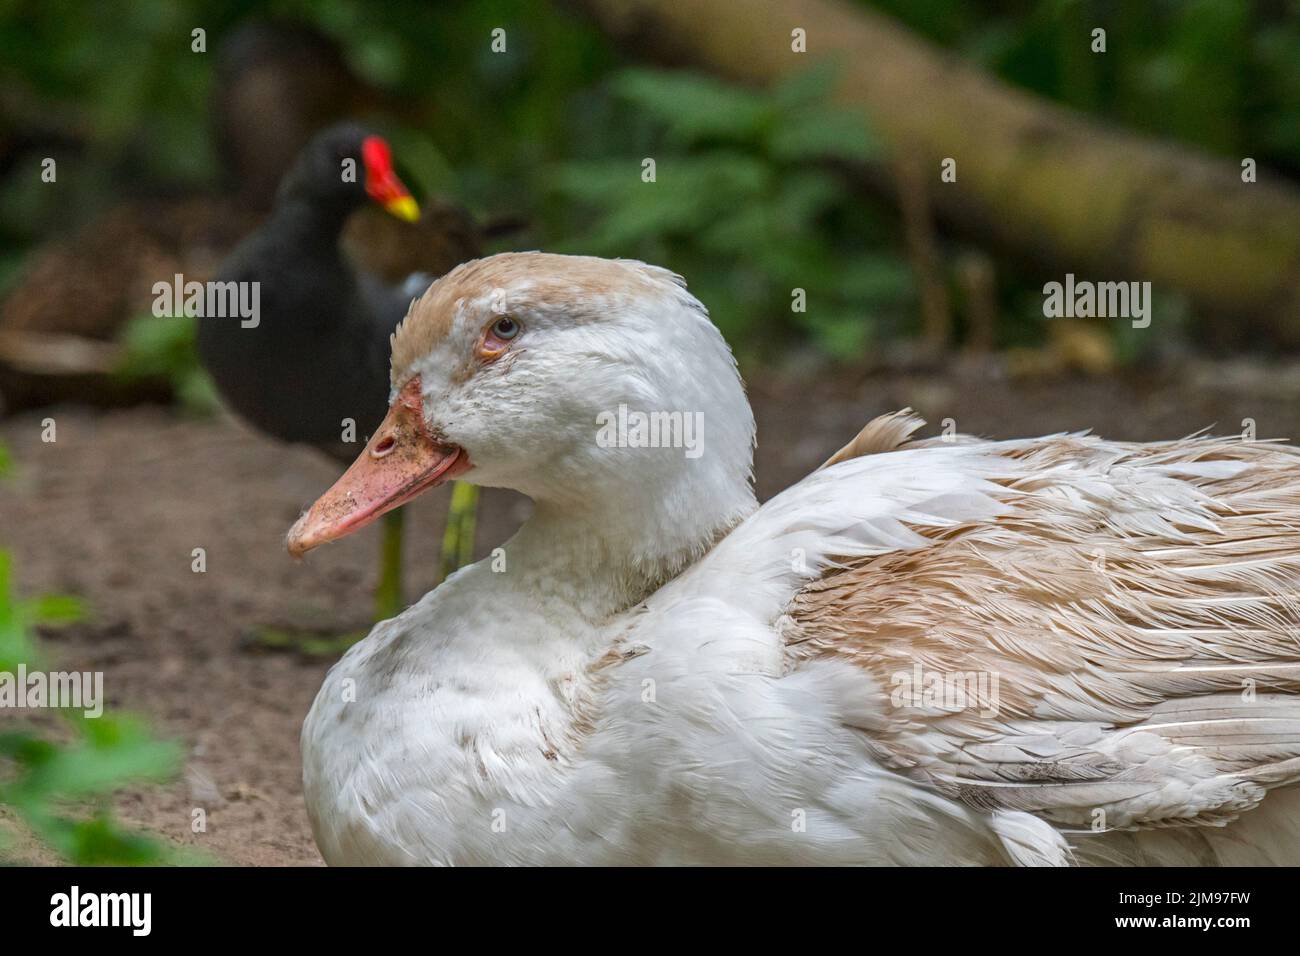 Resting domestic duck and moorhen on land at petting zoo / children's farm Stock Photo